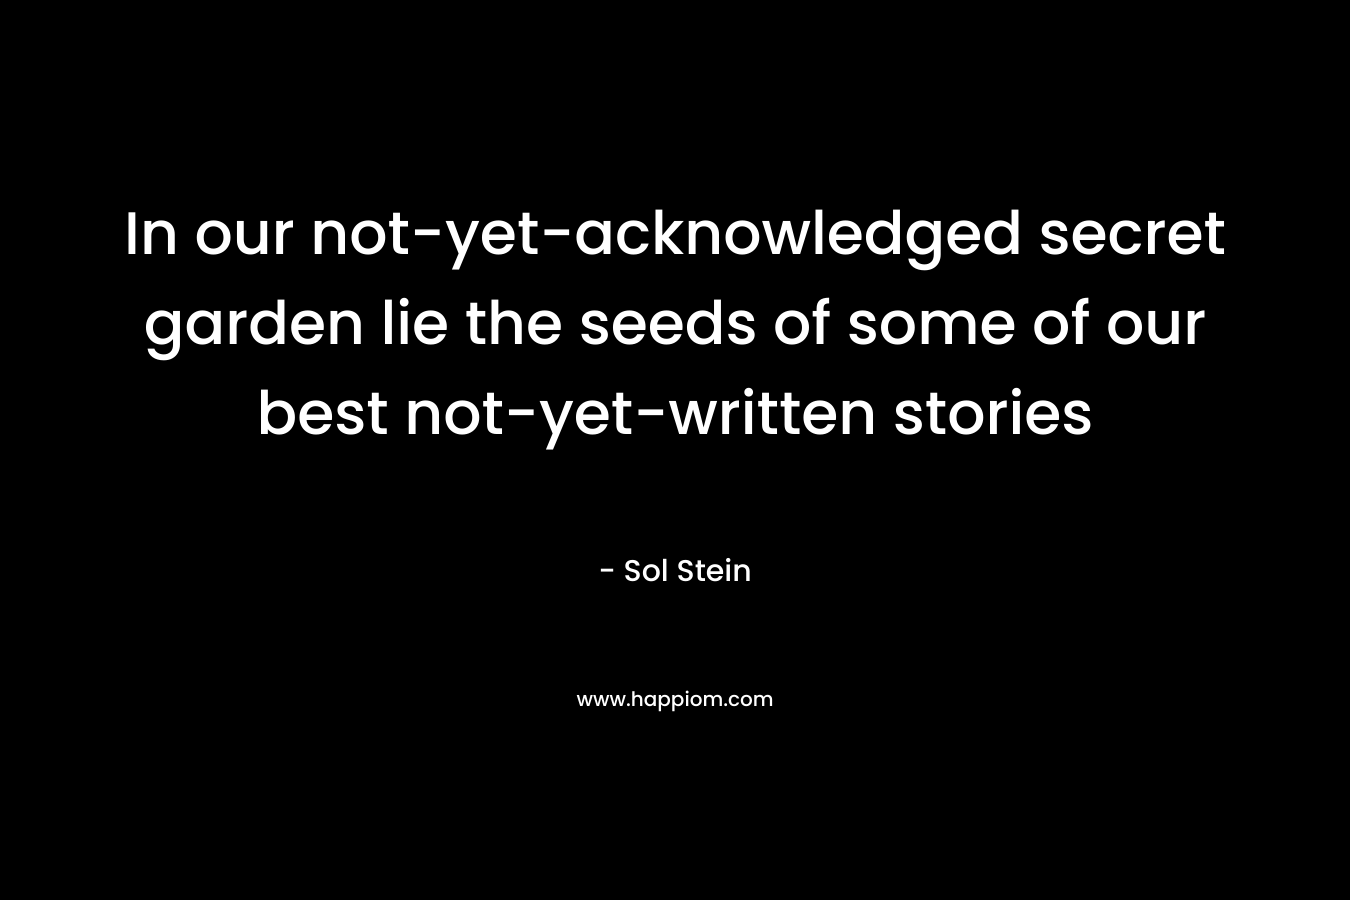 In our not-yet-acknowledged secret garden lie the seeds of some of our best not-yet-written stories